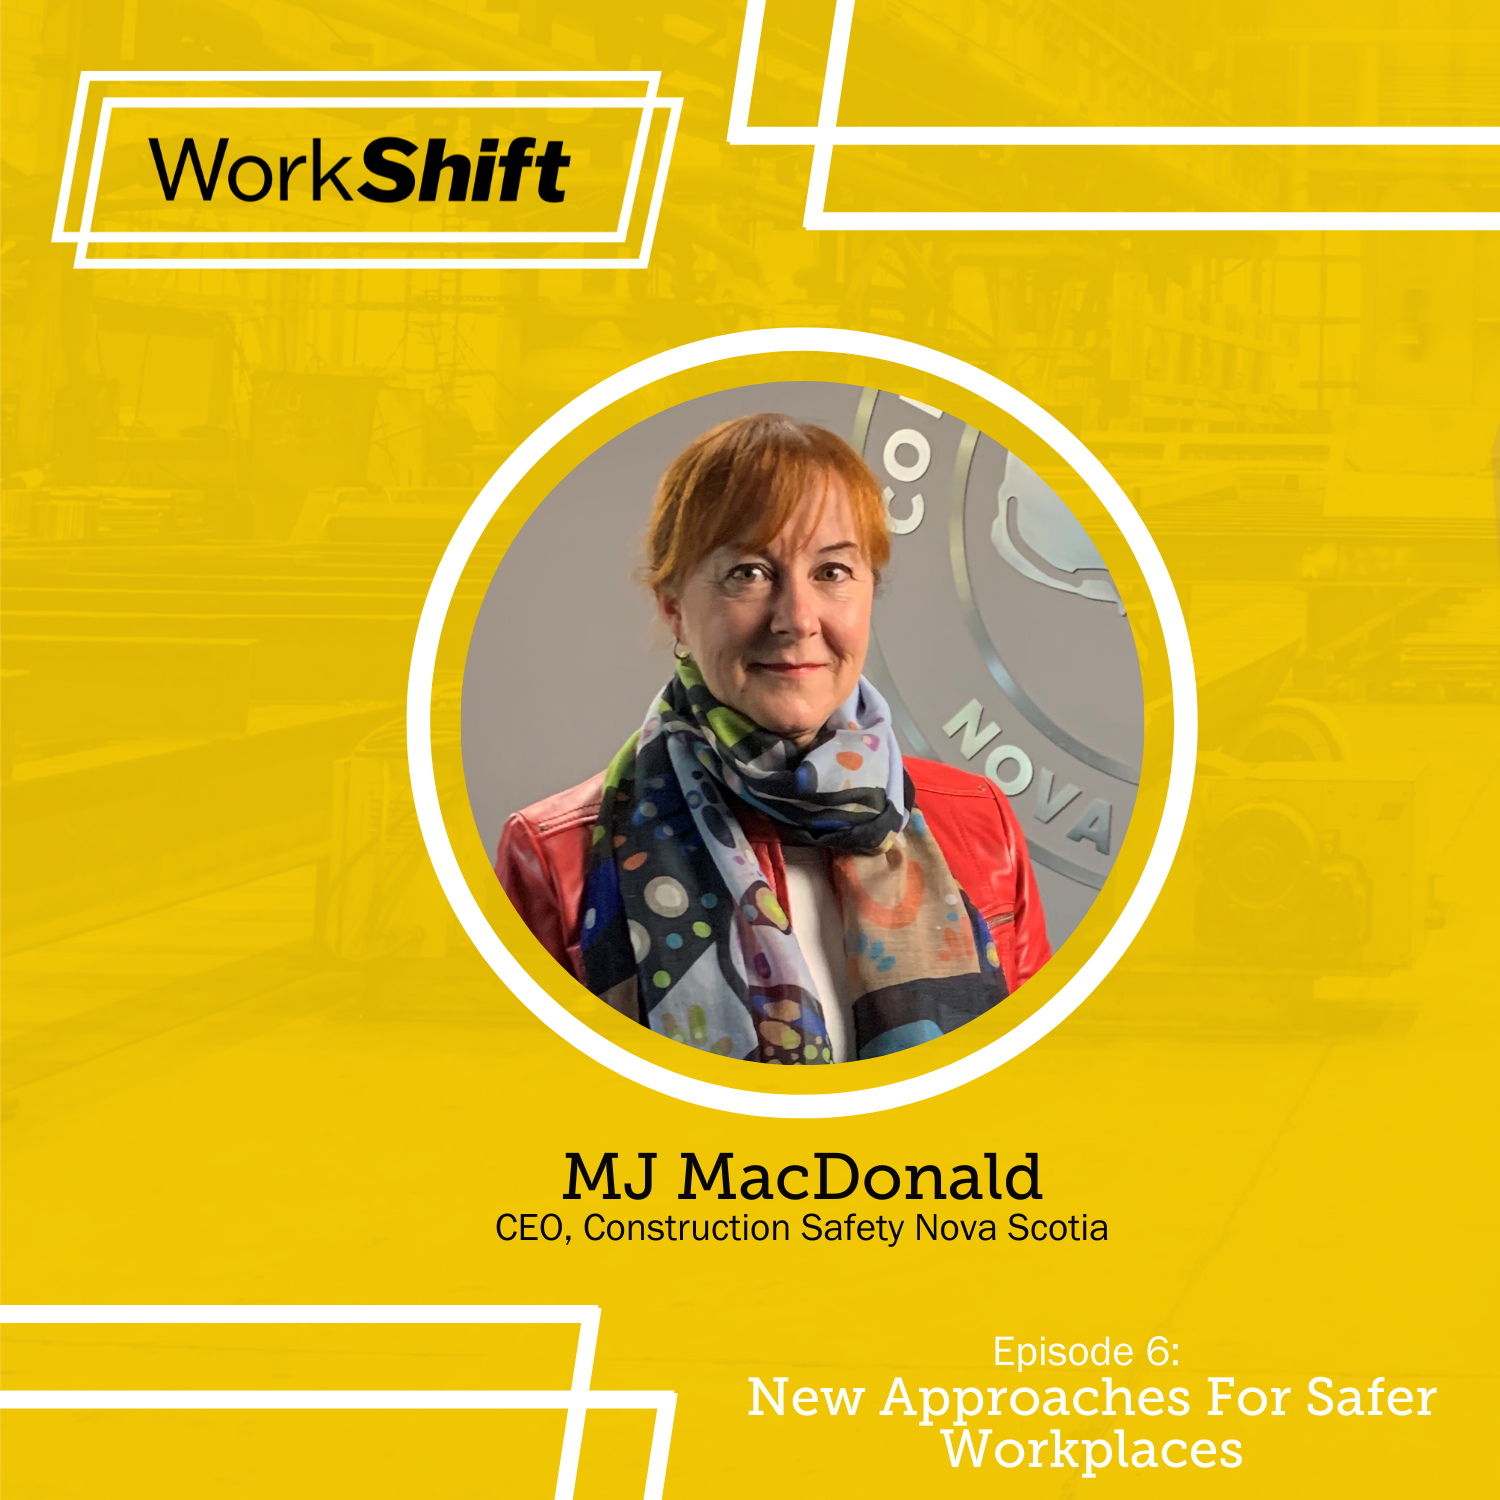 MJ MacDonald for the WorkShift podcast